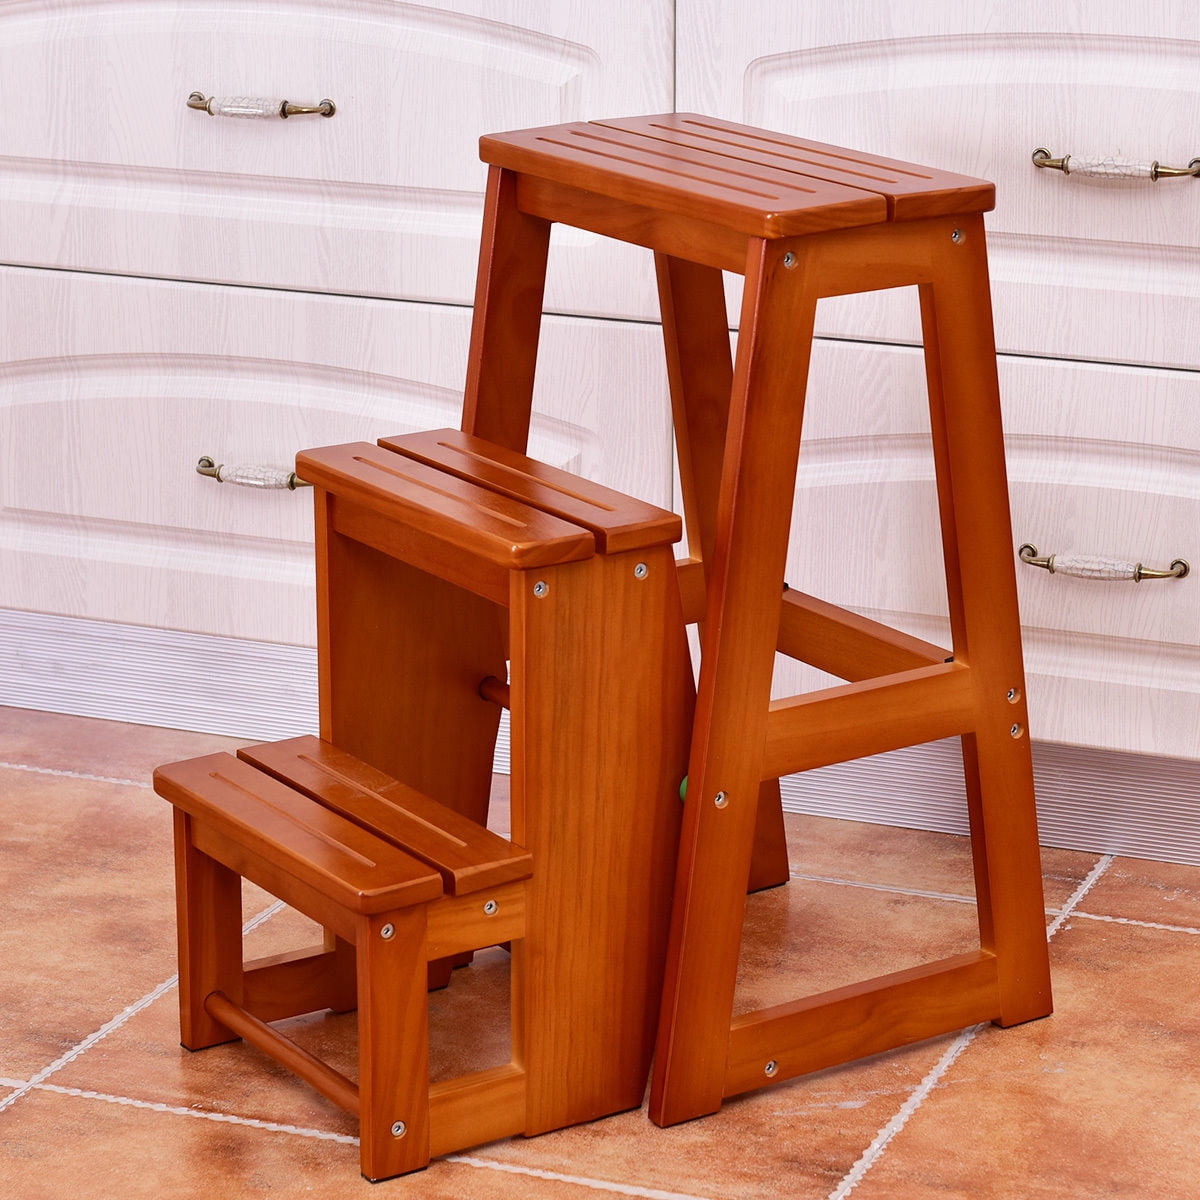 Costway Wood Step Stool Folding 3 Tier Ladder Chair Bench ...